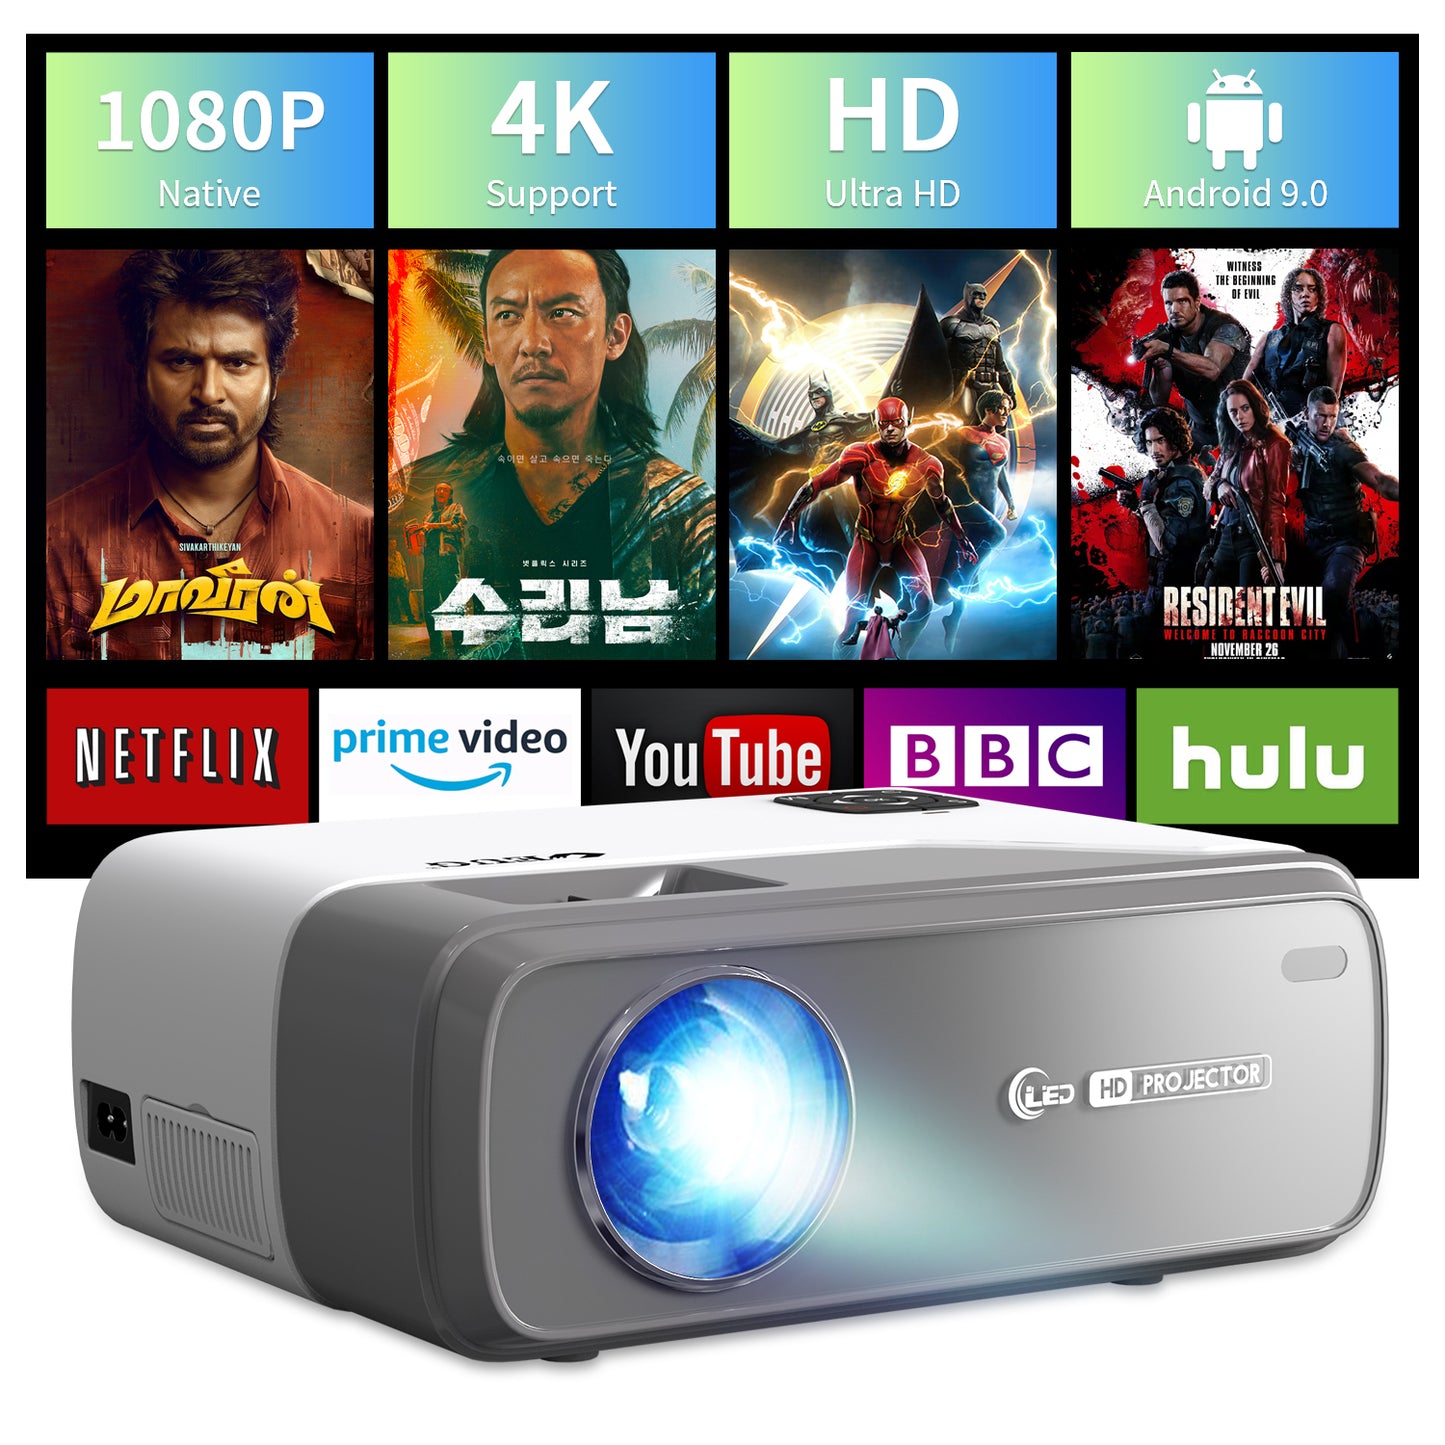 Portable Smart 1080P Android Projector with Bluetooth WiFi, Compact LED LCD Full HD Video Projector Home Cinema Wireless Movie Gaming Outdoor